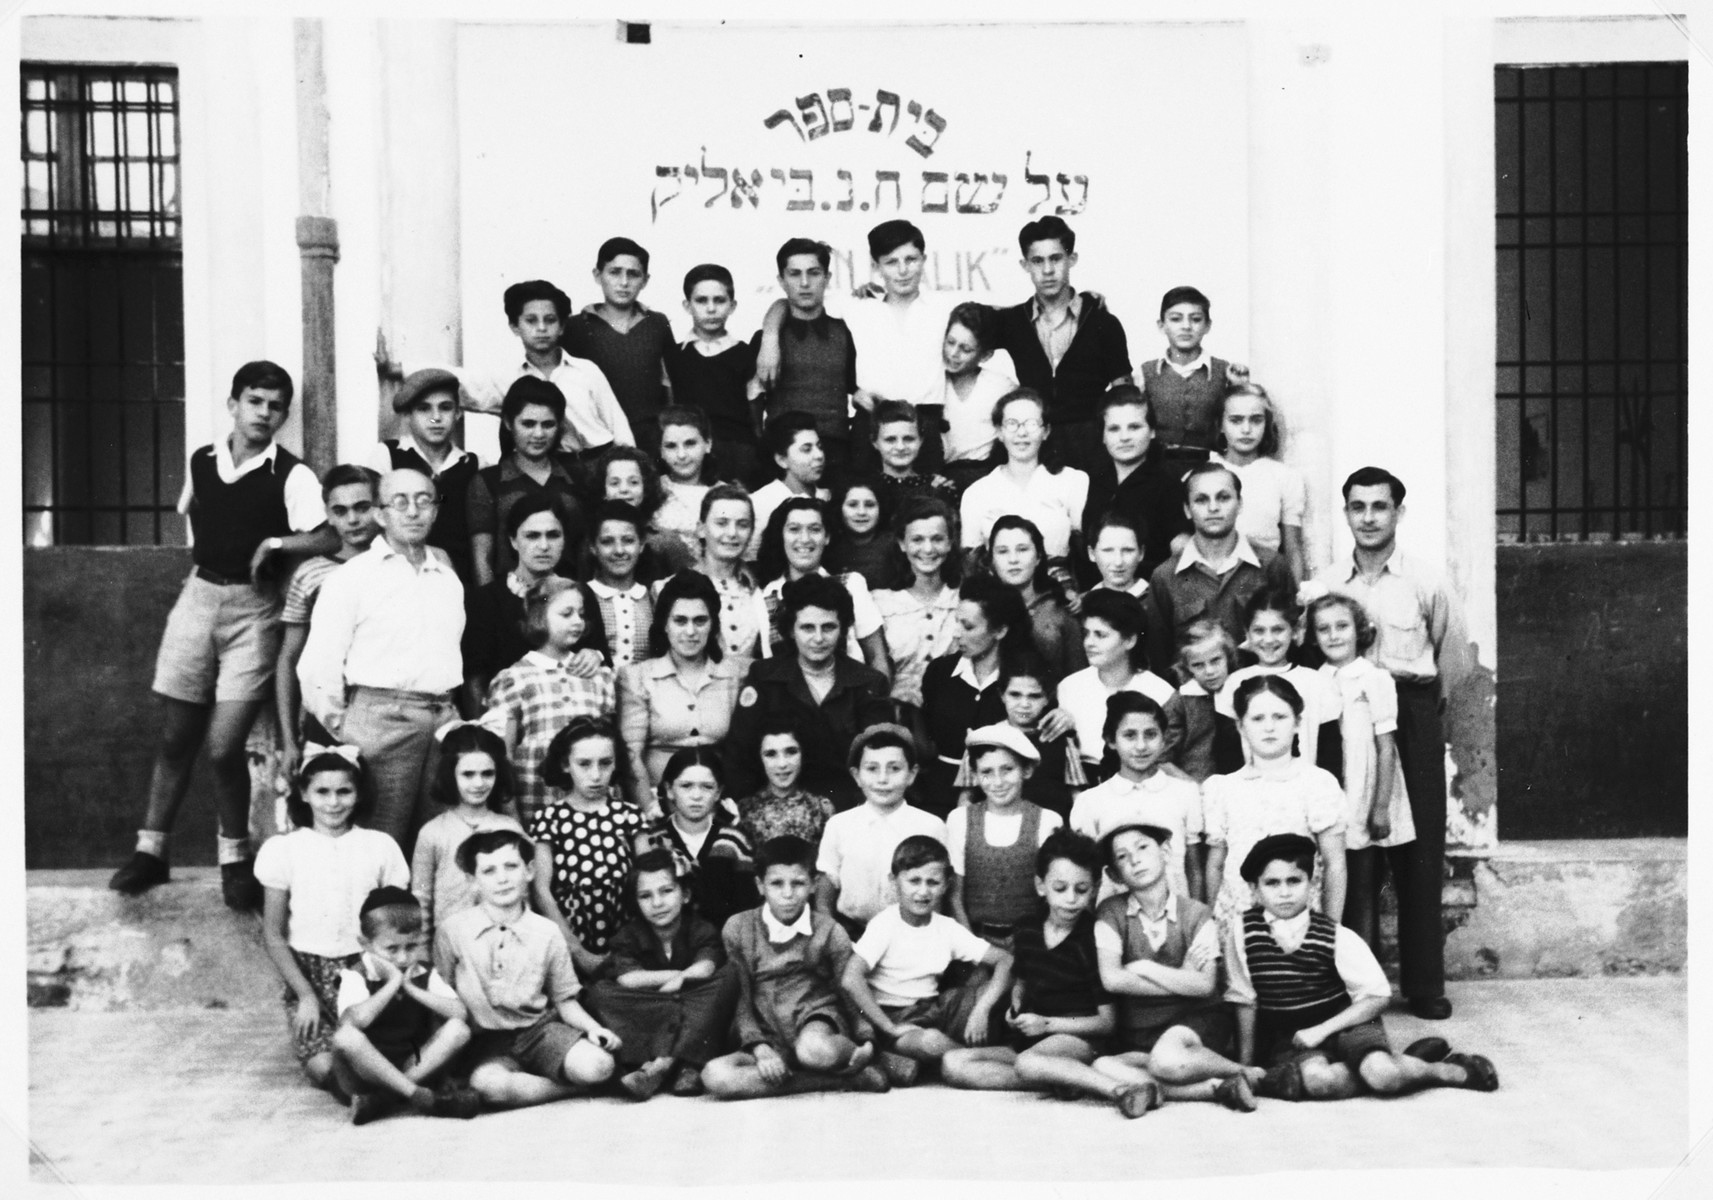 Students and teachers in the Bialik Hebrew school in the Cremona DP camp.

Those pictured include the teacher, Motel Bass (far left, in white shirt), Feige Truszinski, Chaya Truszinski, Shmuel Unger, Shie Zoltak, Luba Klot, Raizel Grinszpan, and Ernst Schnittlinger (behind teacher), Lea Schnittlinger (third row from bottom weating plaid dress), Esther (Grinberg) Abrams (third row from bottom, second from left, in light-colored dress) Josephine and Alexander Schnittlinger (far right, top two rows), and Selig Tabak (fourth row, second from the right). Basia Eisenberg is seated in the second from, third from the left. Sunja Kaufman is standing in the back row on left (wearing dark shirt).